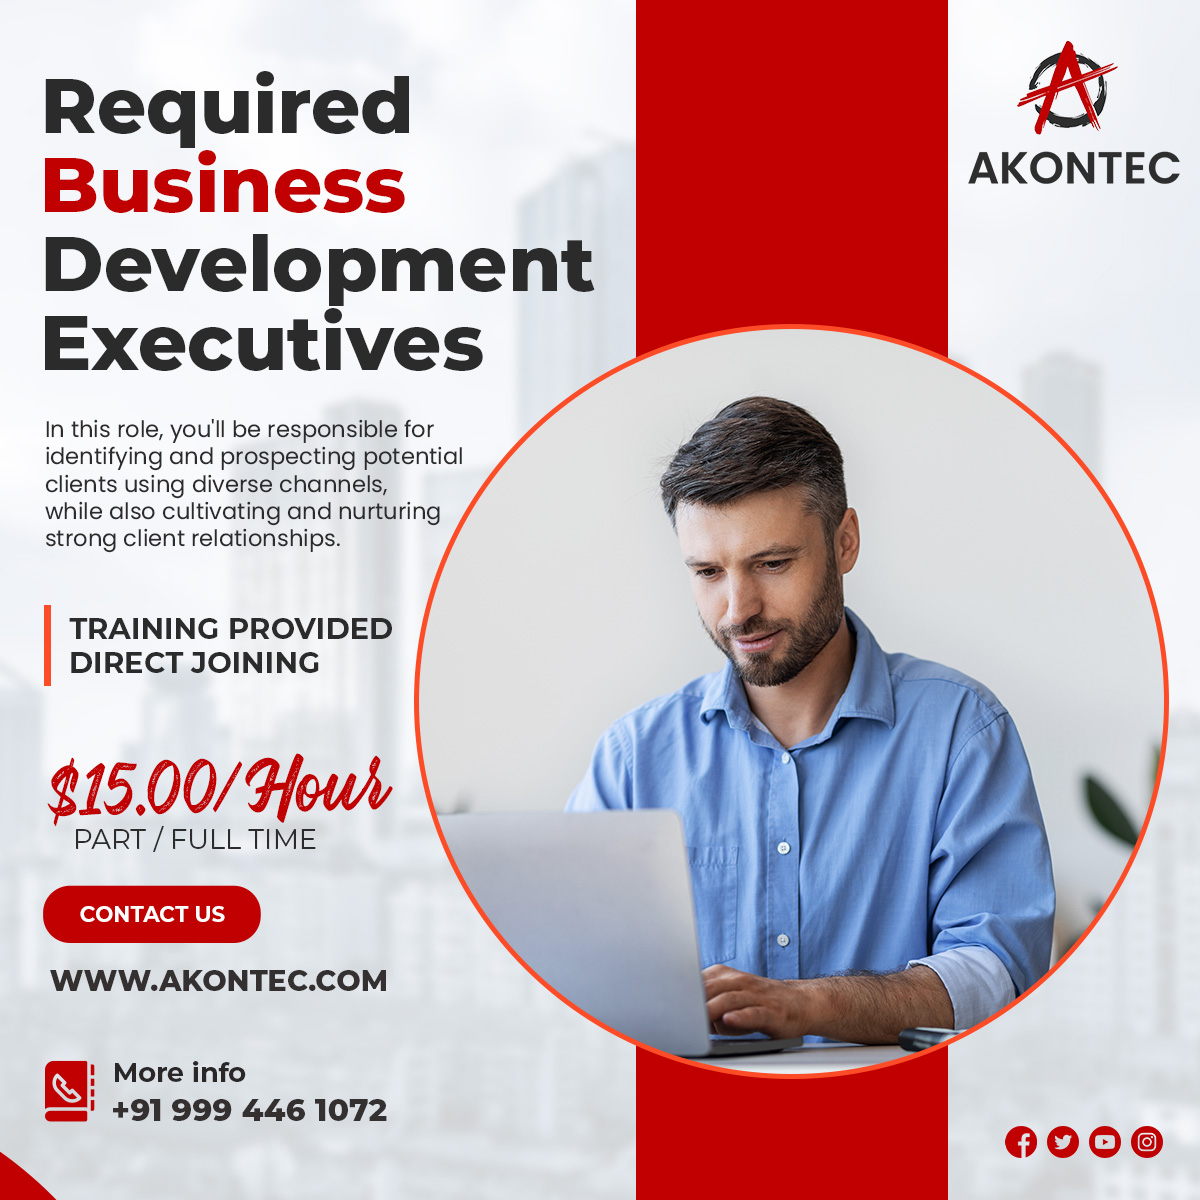 WE ARE PROVIDING INBOUND BPO PROJECT
Required Business Development Executive
Training Provided Direct Joining
$15.00/Hour
Contact Us
akontec.com
more info
9994461072
DROP YOUR EMAIL AND CONTACT NUMBER
pparjapati8834@gmail.com
#socialmarketing
#socialwork